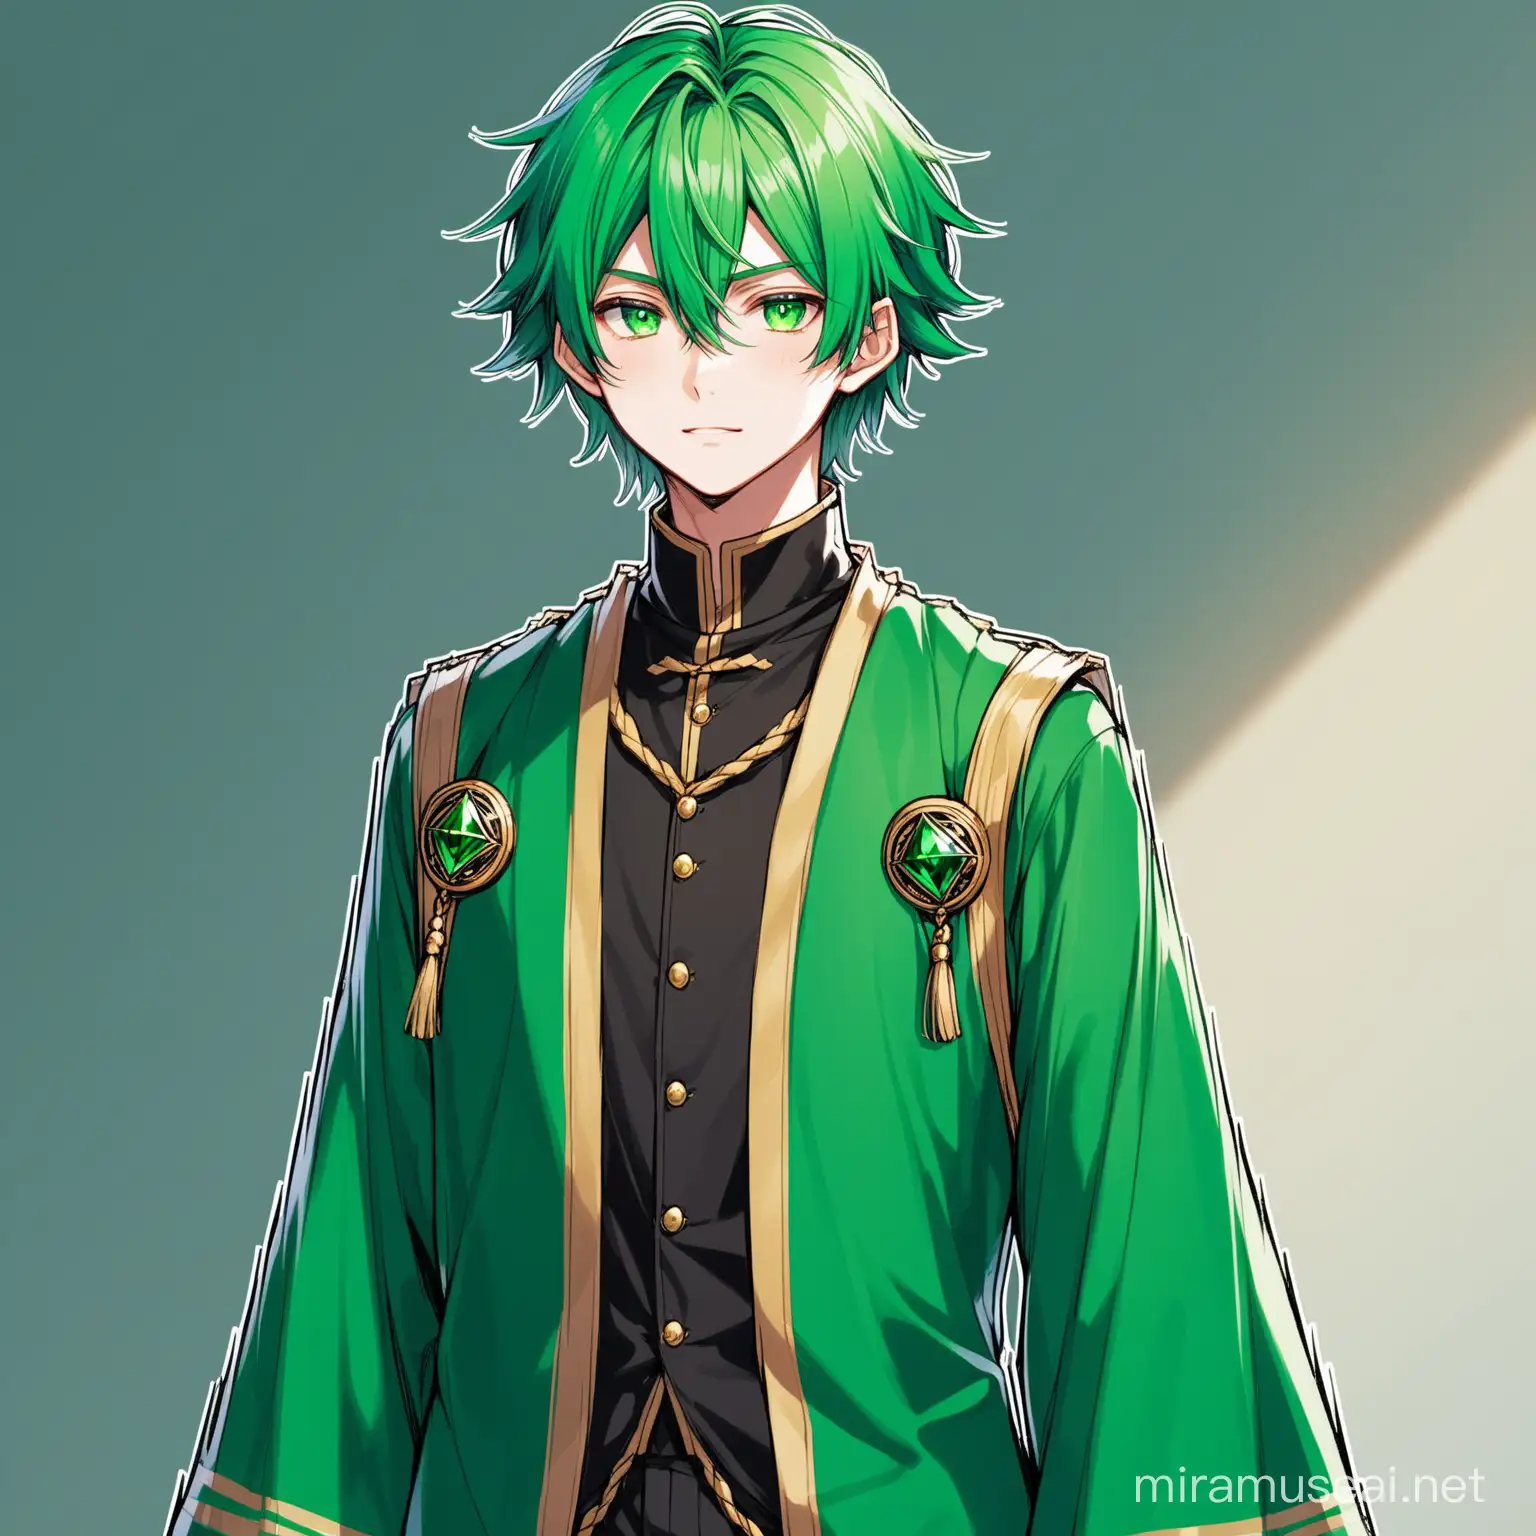 A Green Haired Male who has Emerald colored eyes and looks like 21 years old, wears an outfit that is similar to magic academy students with the color of Black and Green.
